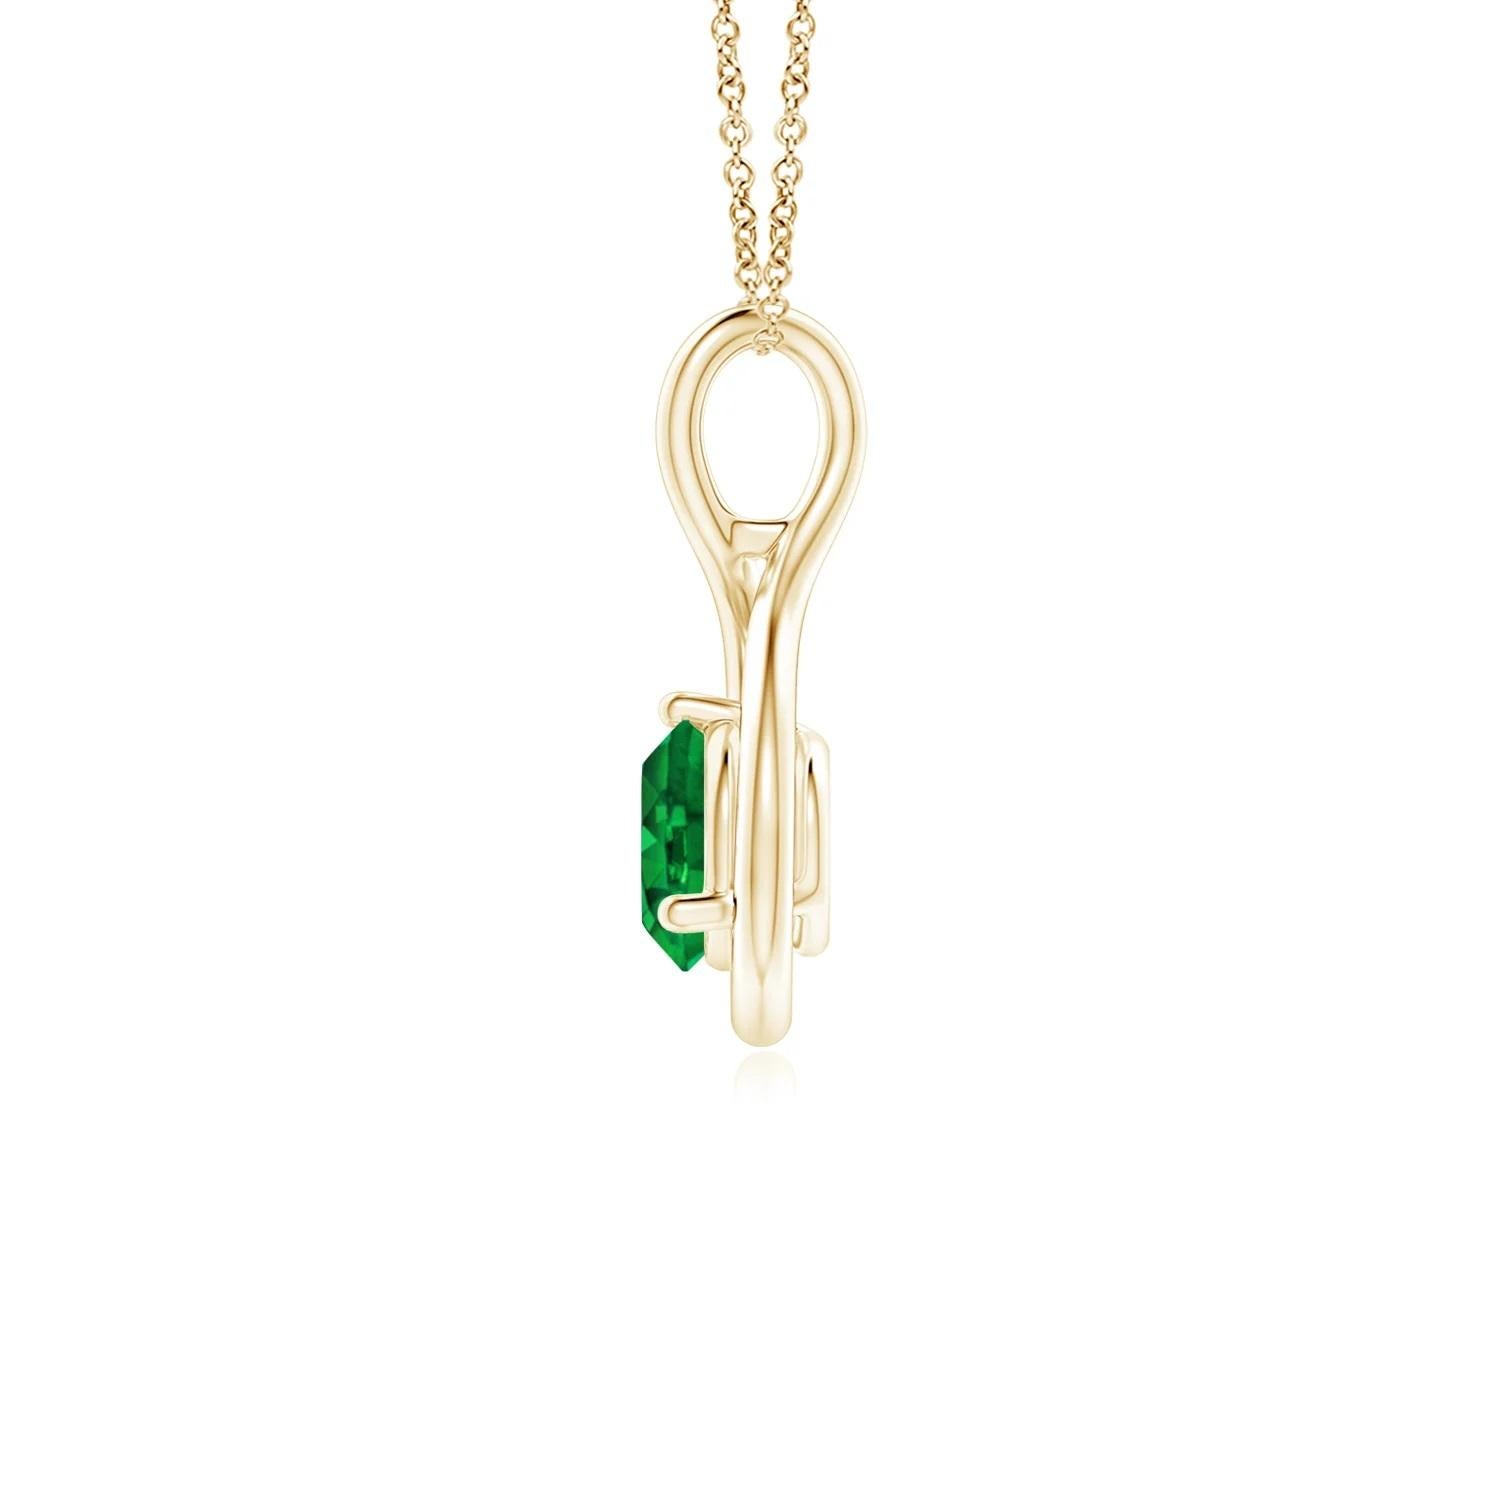 Nestled within a graceful infinity loop is a prong-set solitaire emerald that draws the eye with its lush green hue. The fluid elegance of this lustrous 14k yellow gold infinity twist pendant evokes a feminine vibe.
Emerald is the Birthstone for May